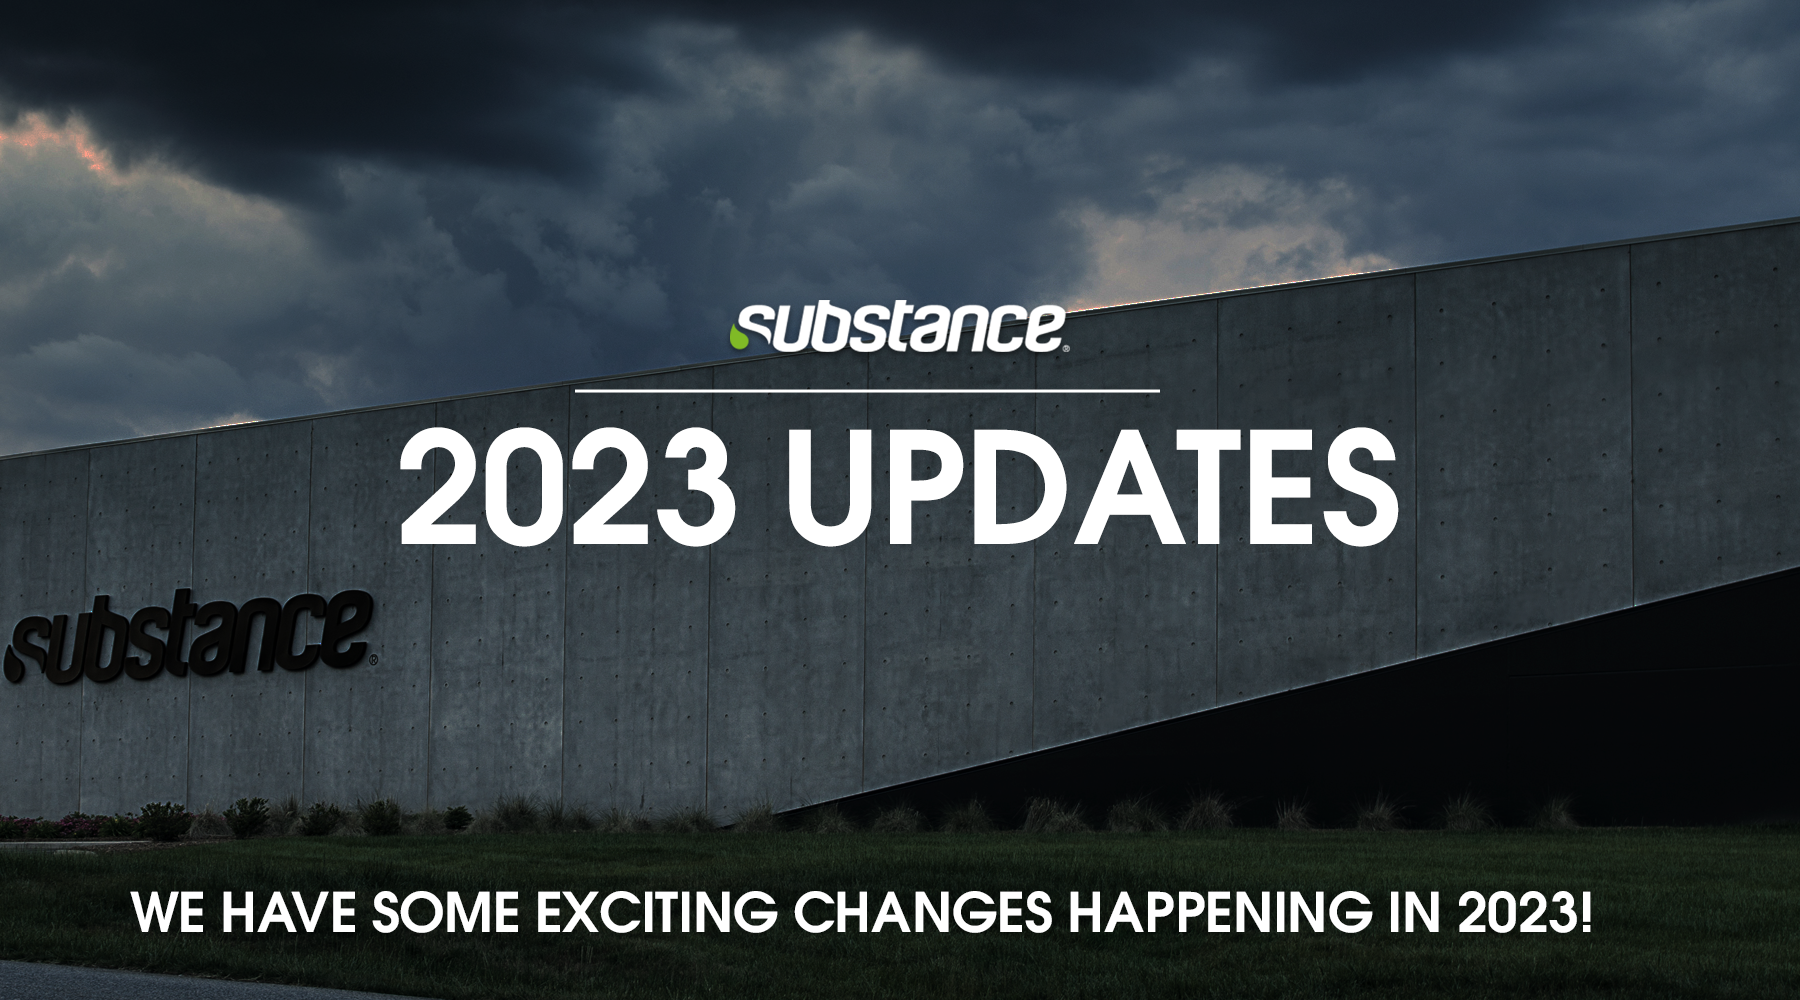 A 2023 Update From Substance